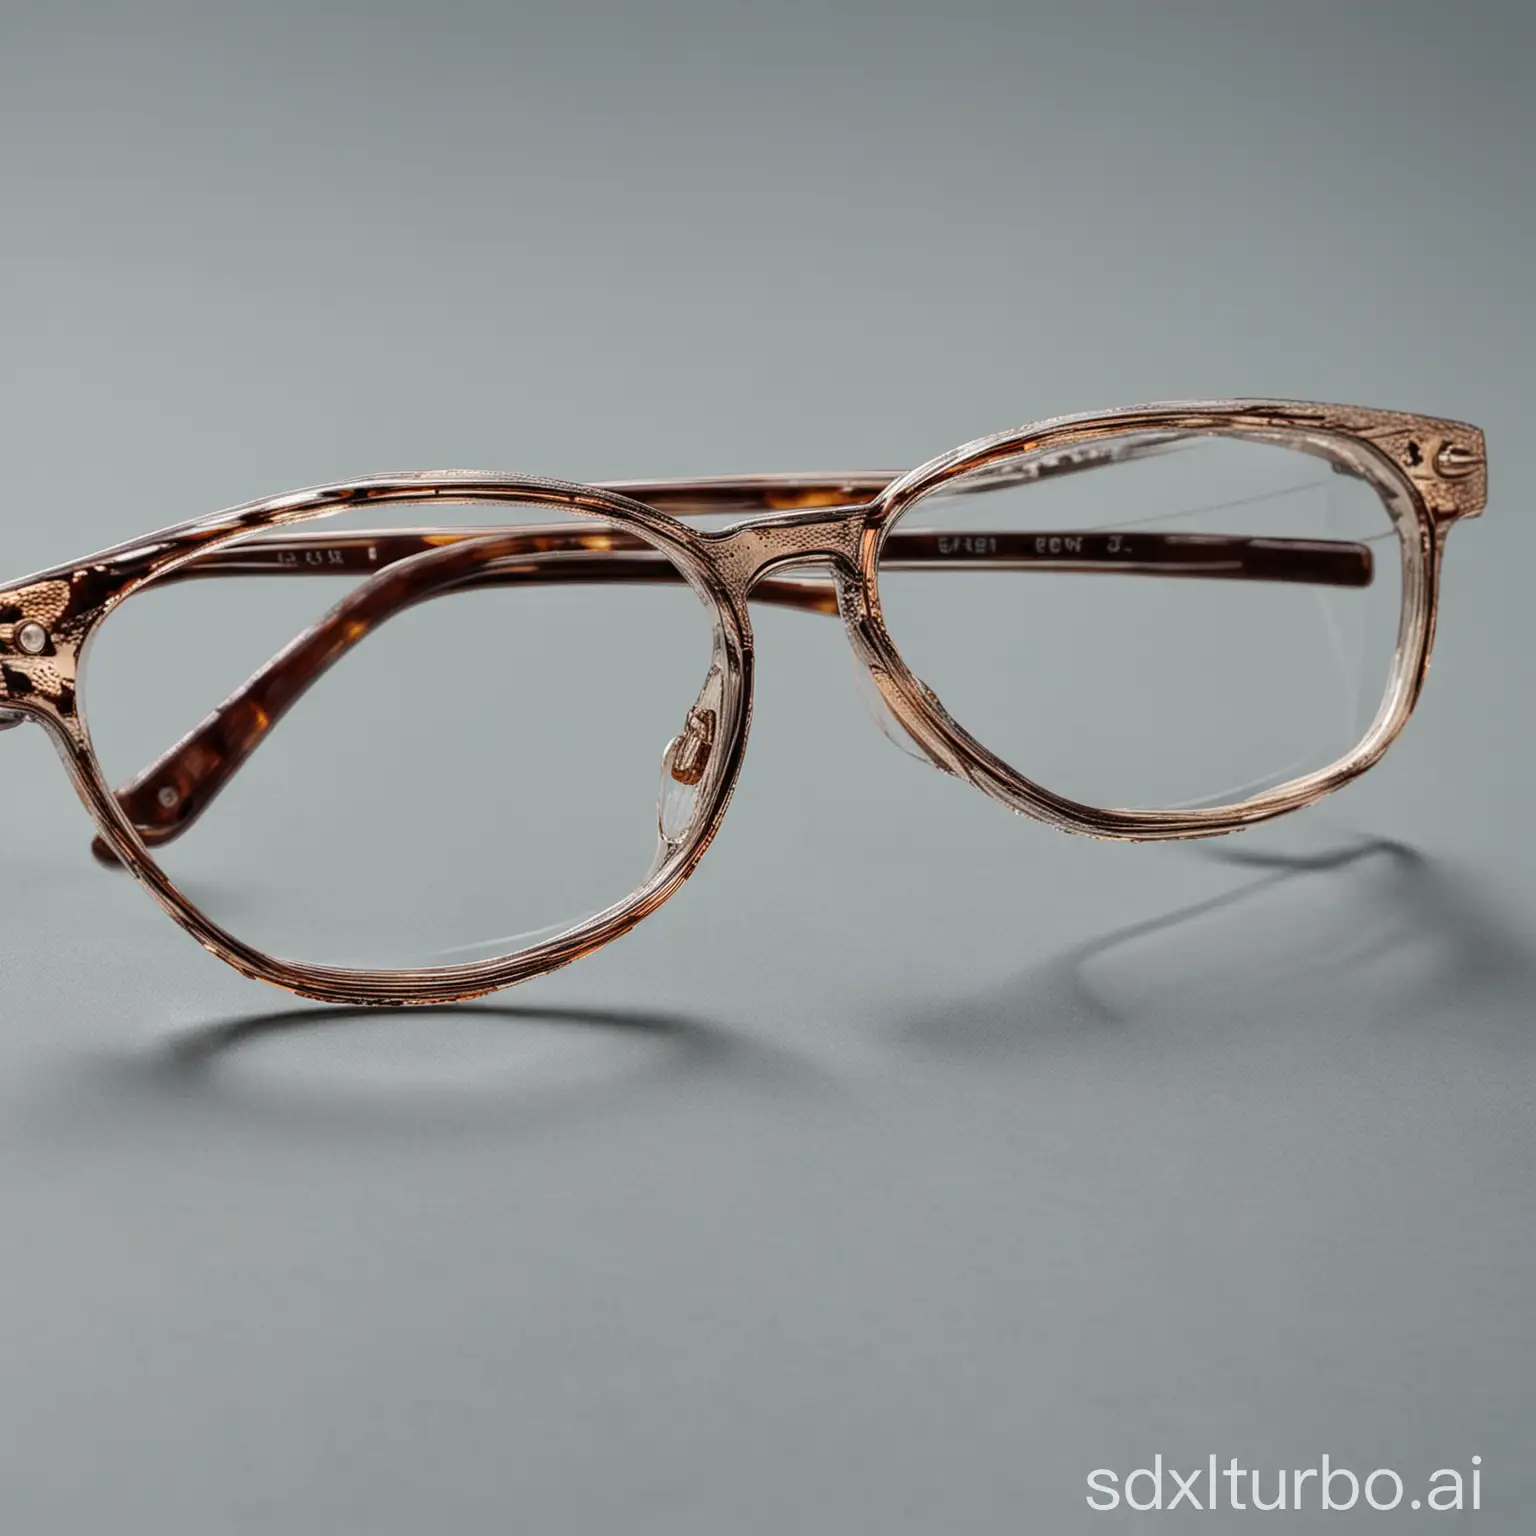 Closeup-View-of-Classic-Metal-Eyeglasses-with-Clear-Lenses